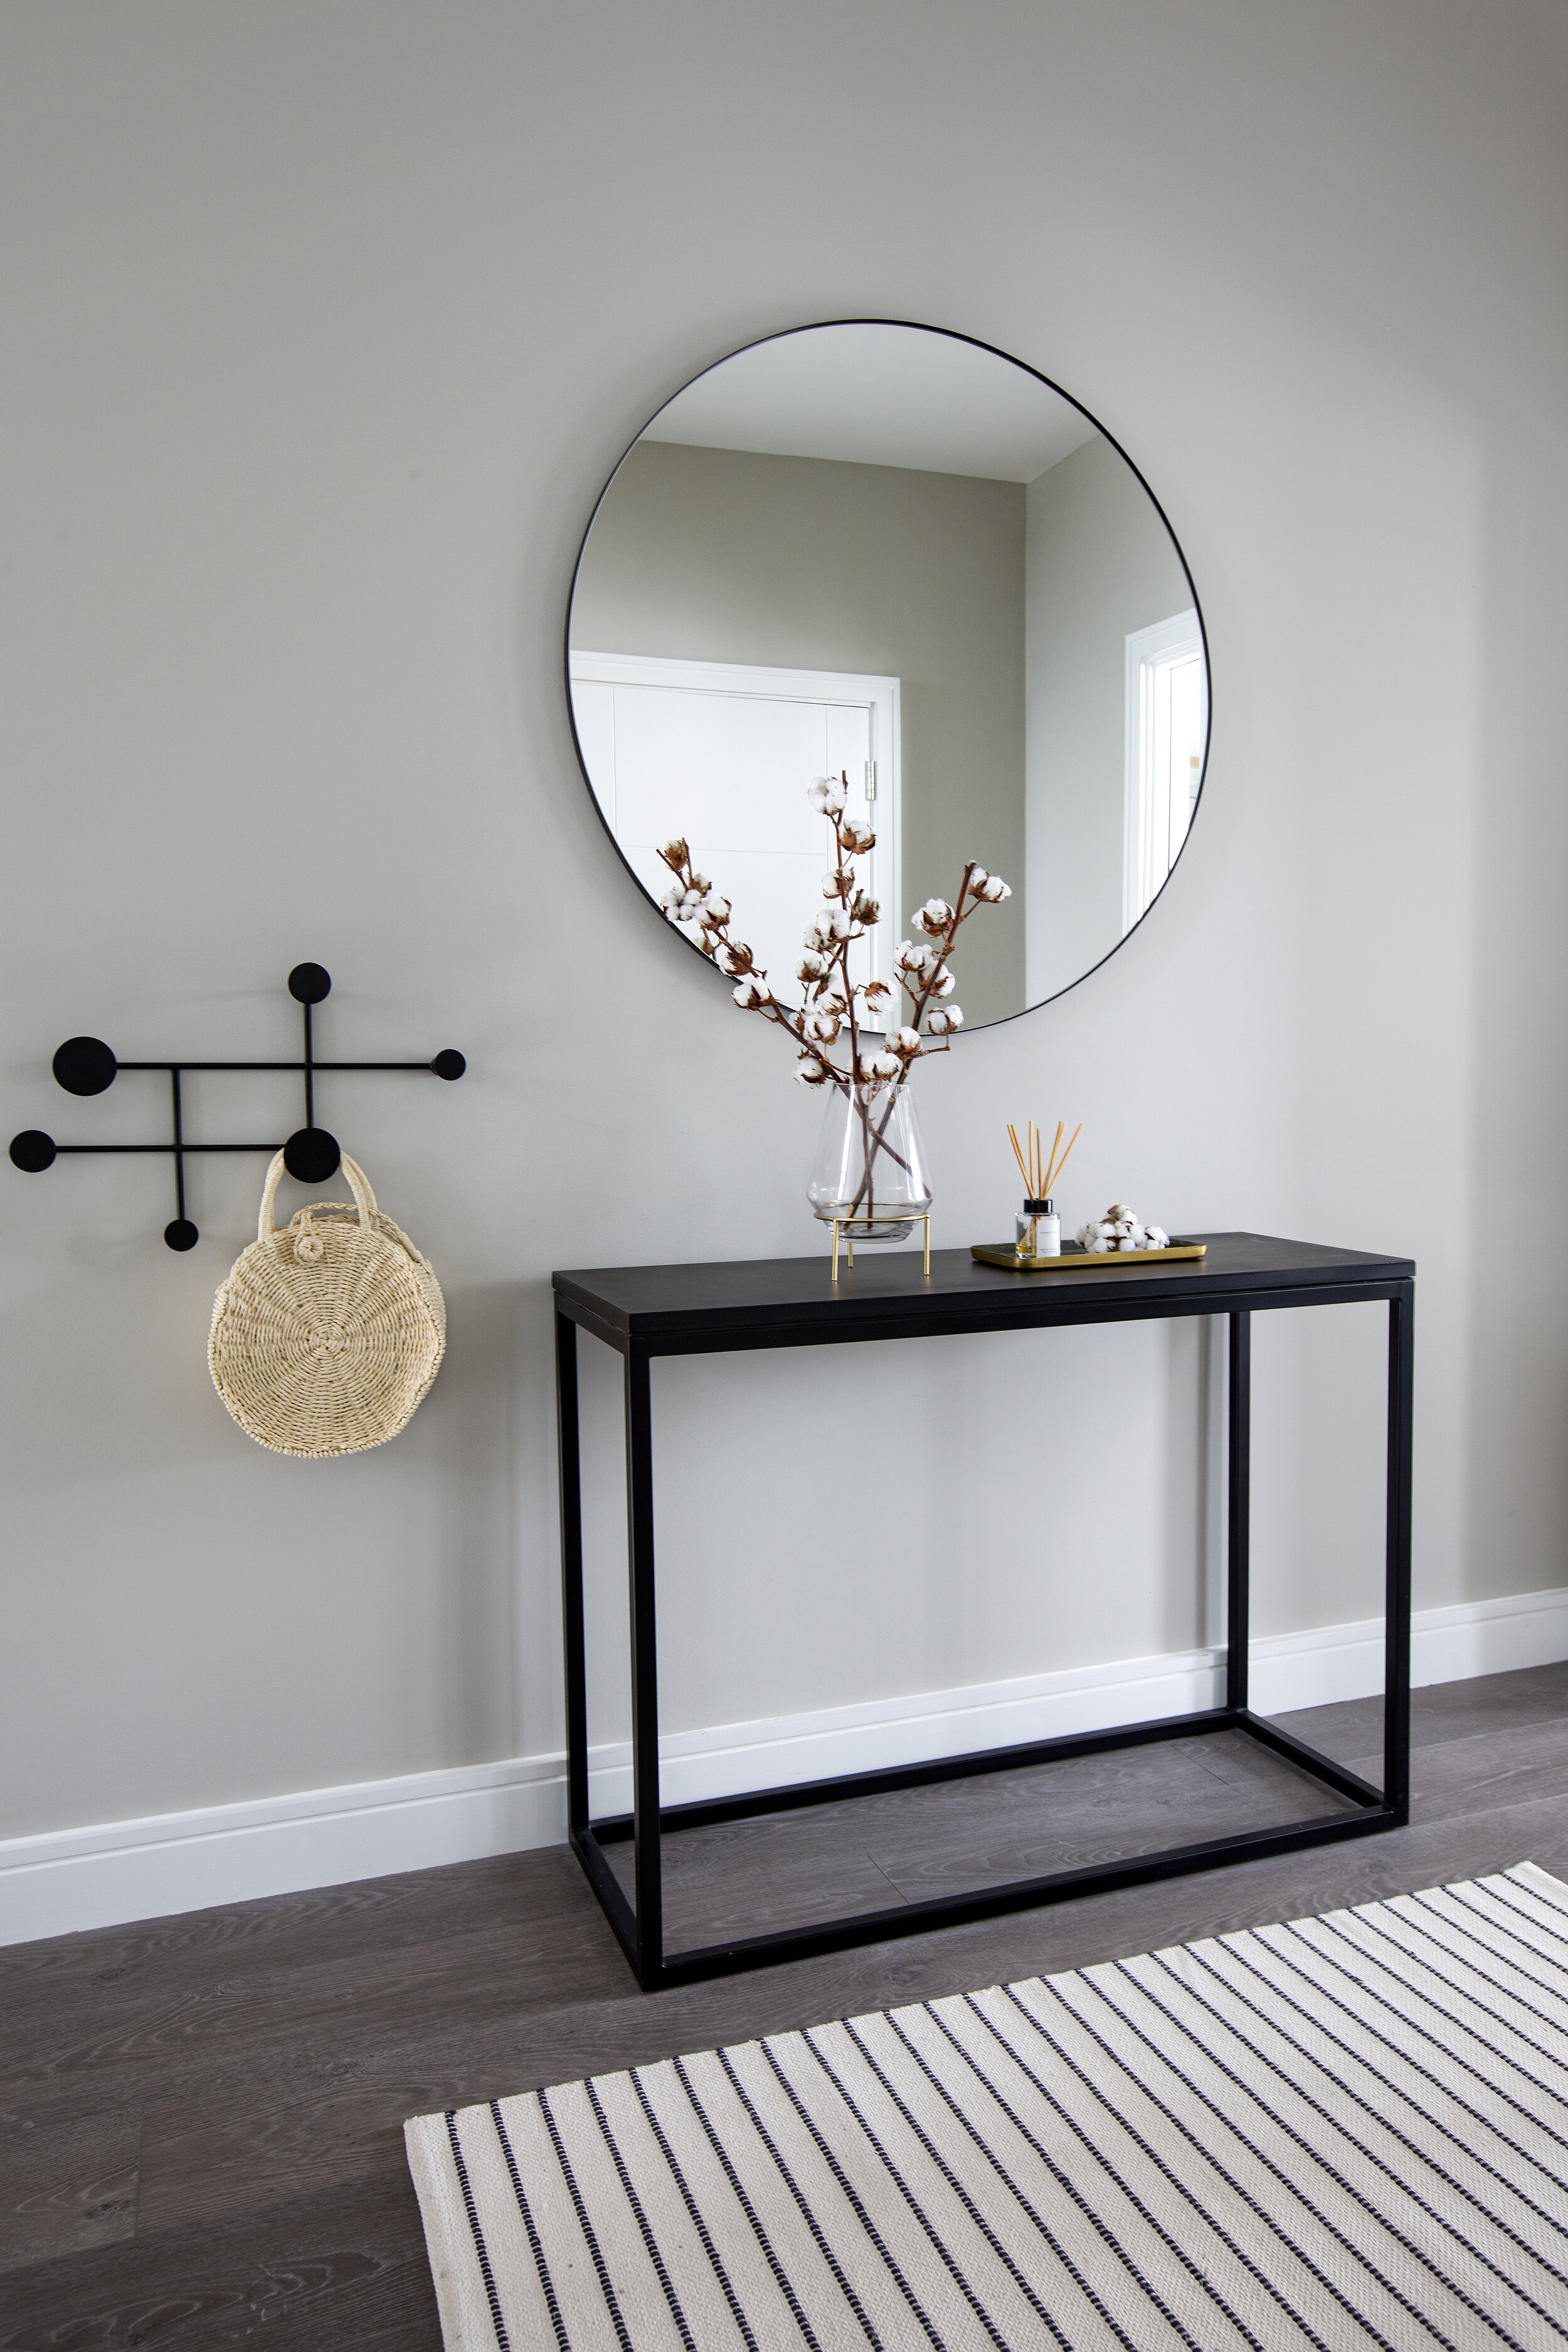 simple black hallway stand and circle mirror